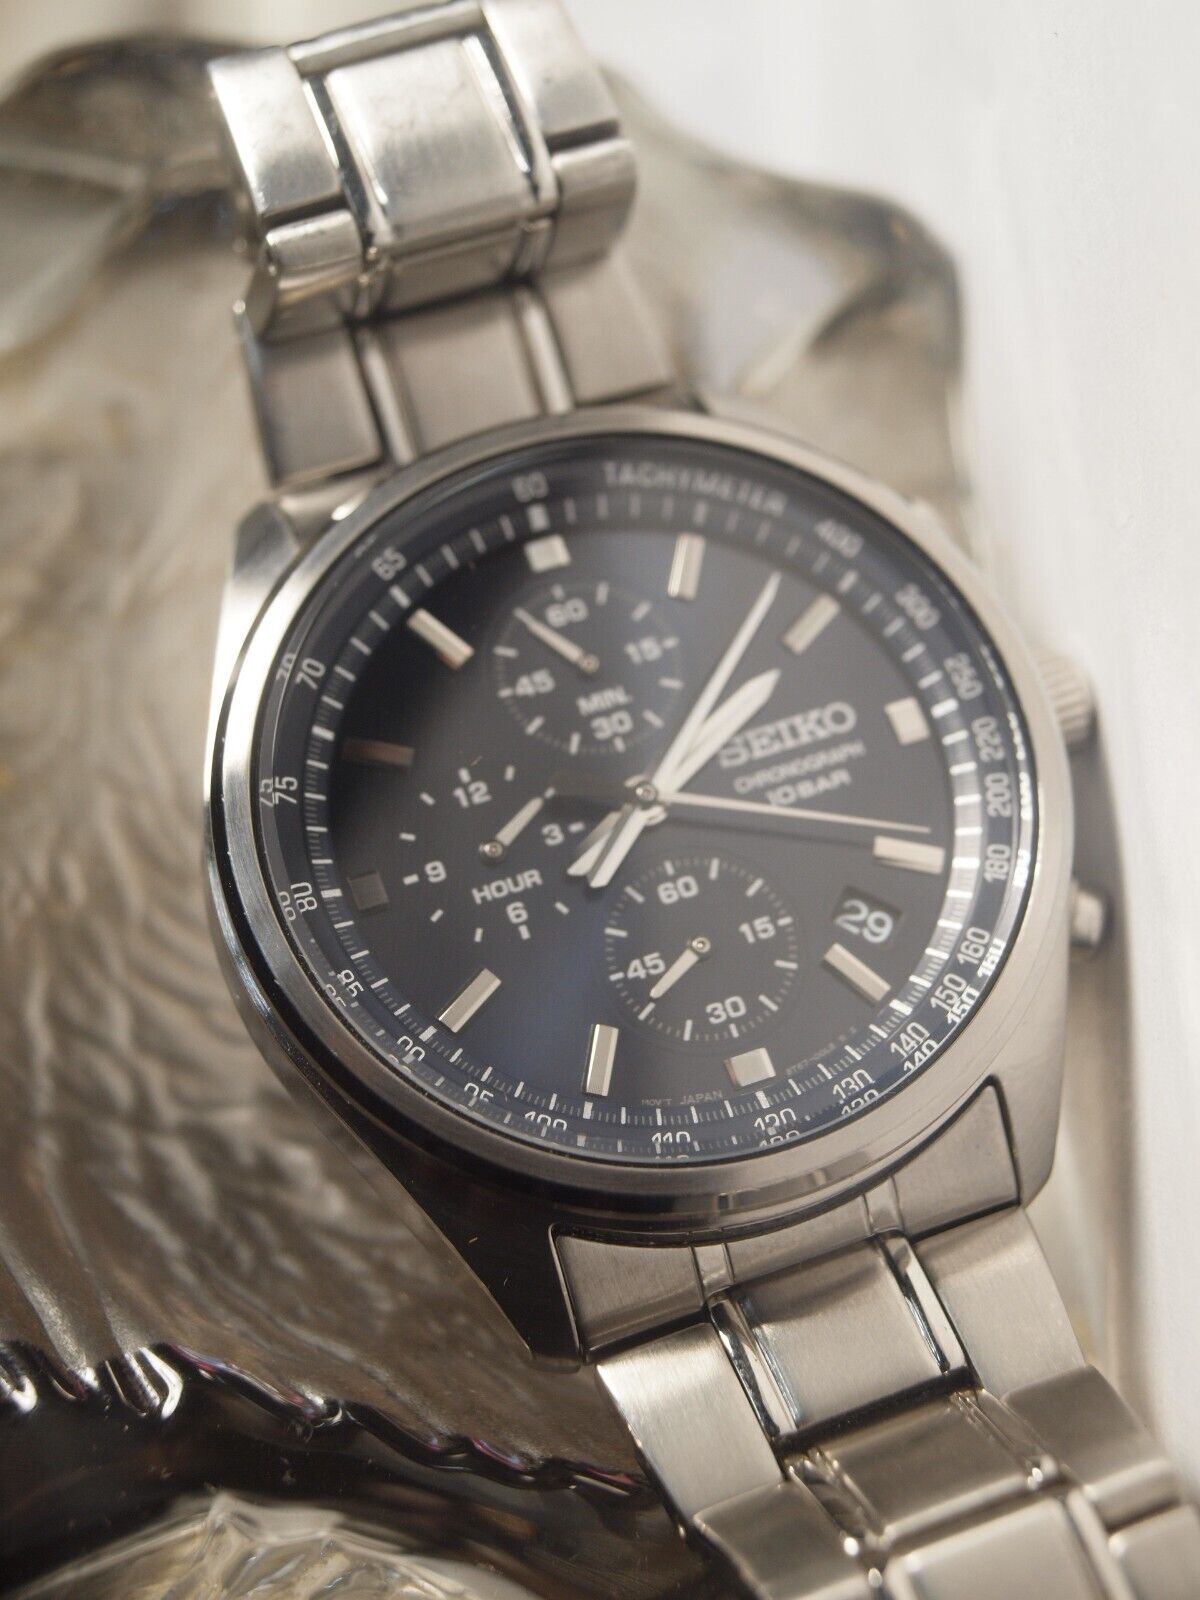 SEIKO CHRONOGRAPH 10 BAR (8T67-OOLO) WATCH IN SILVER & BLACK ...